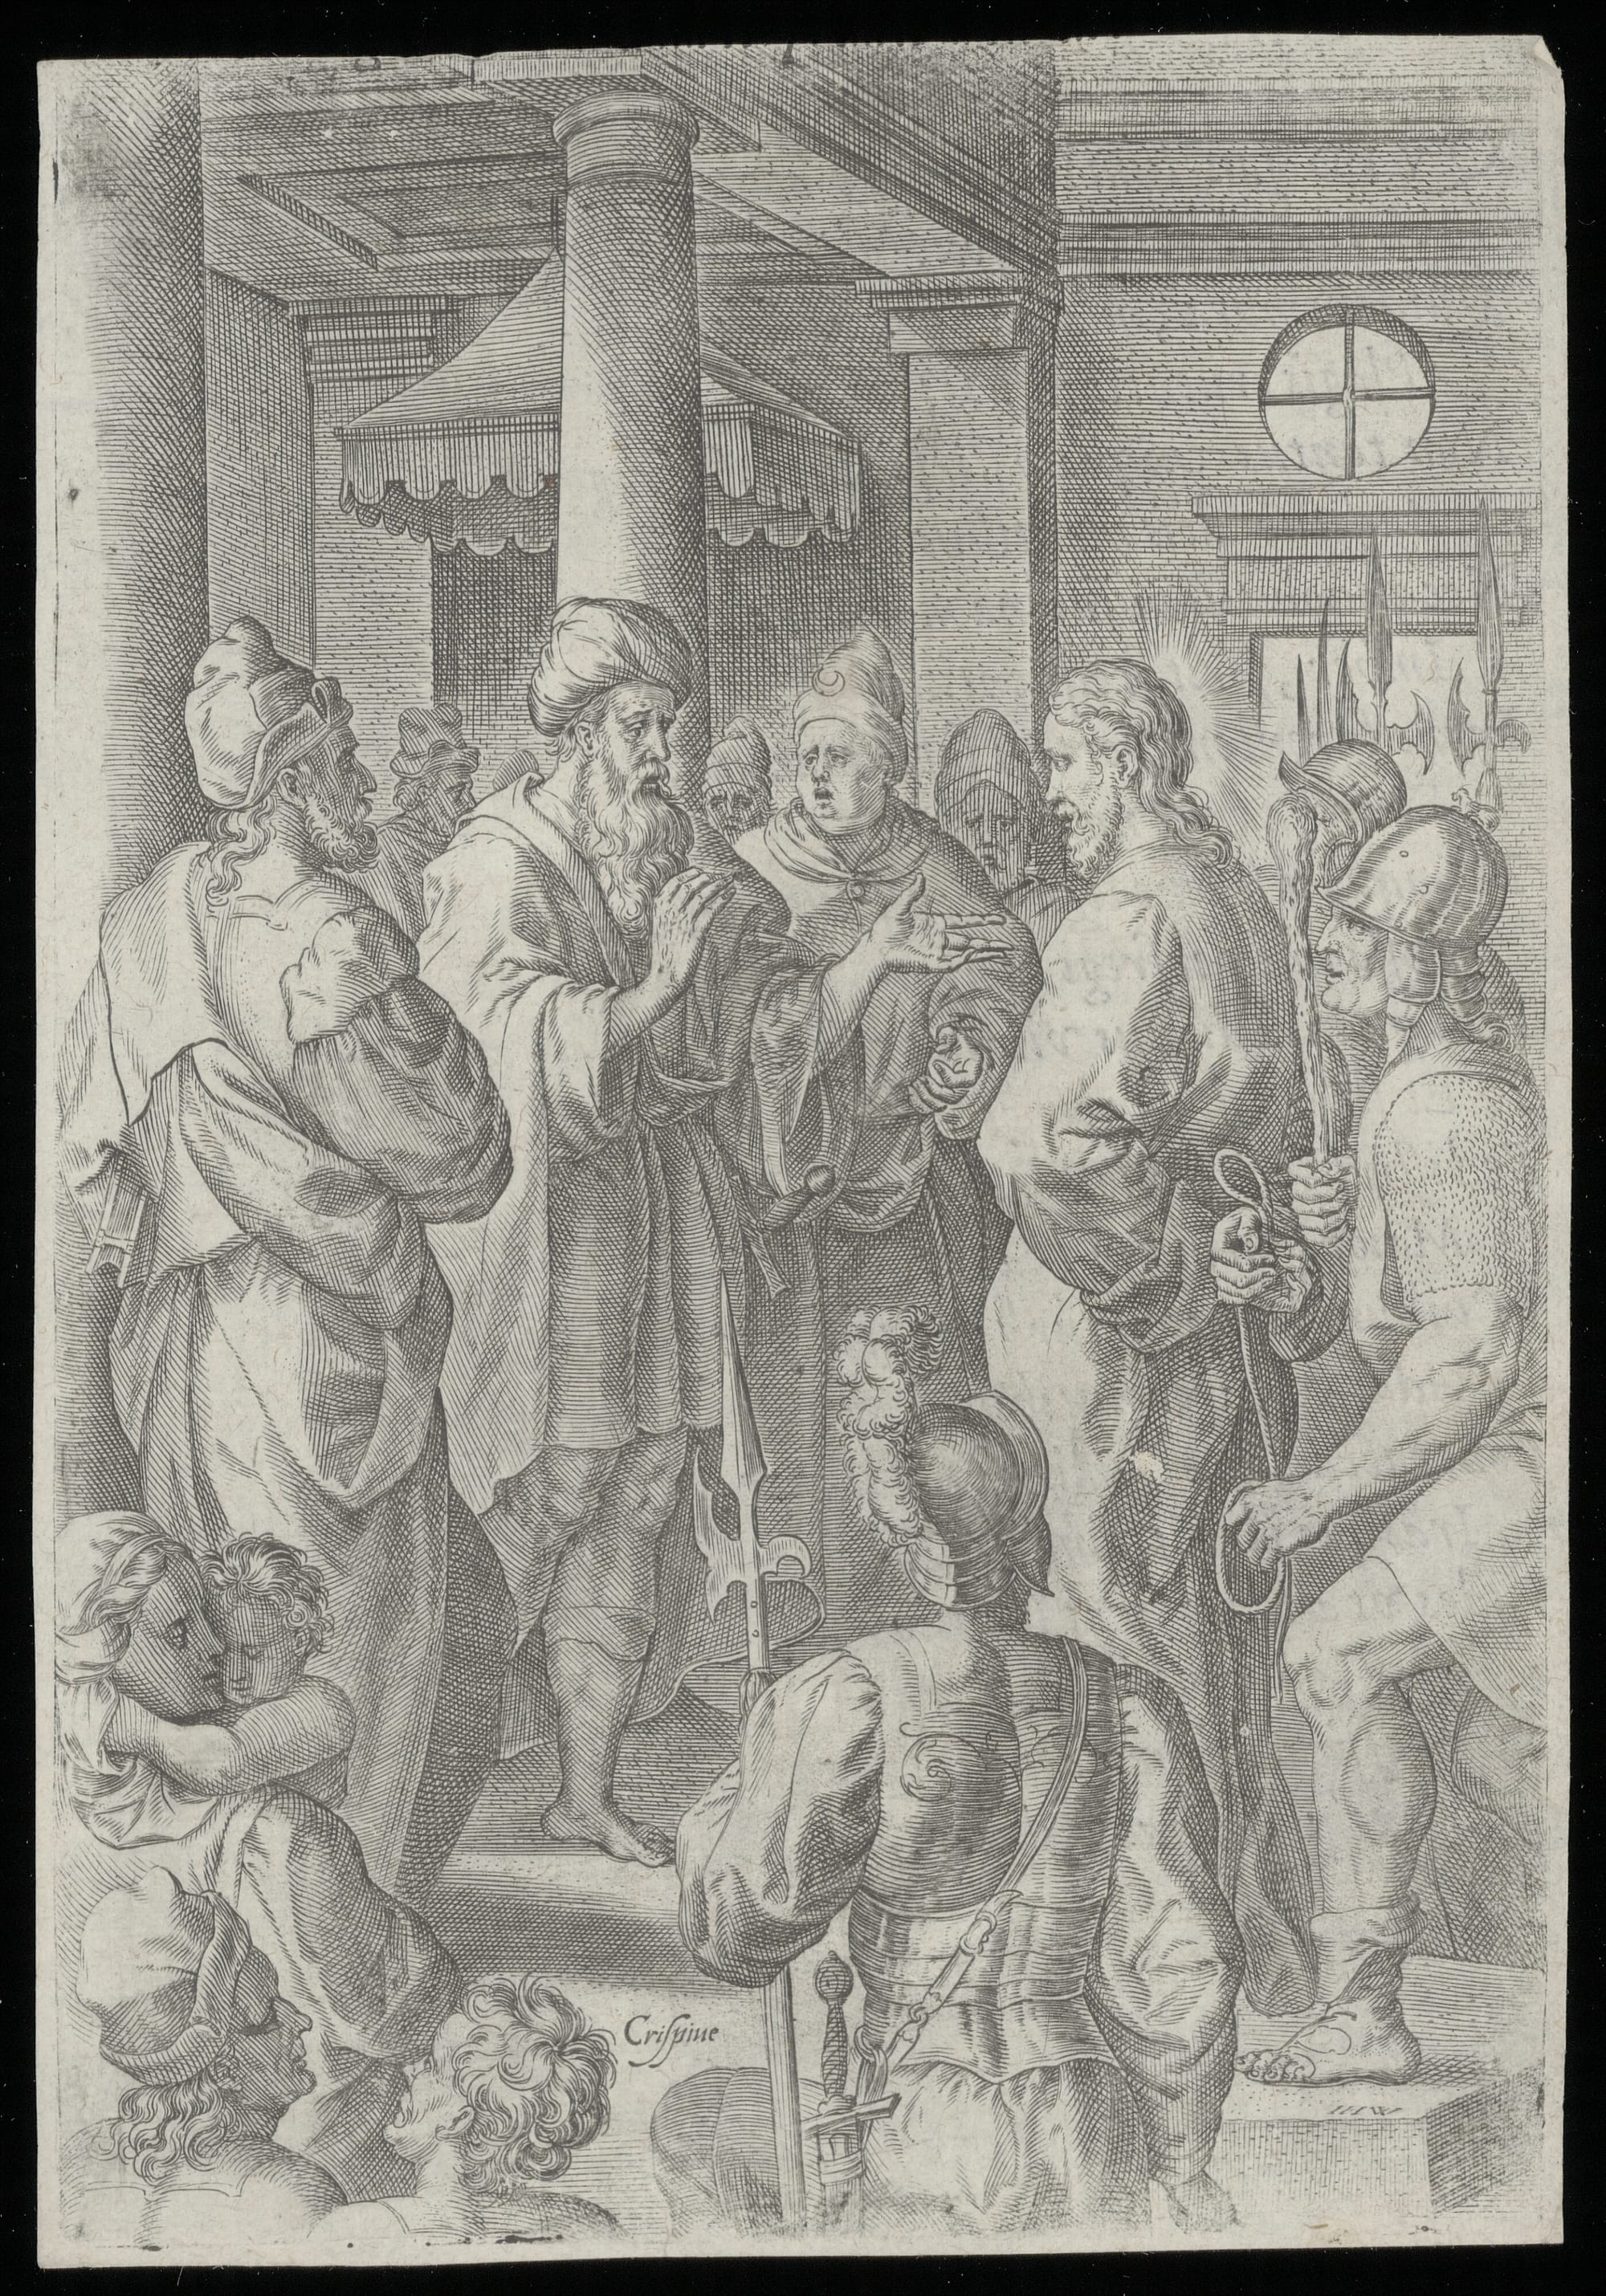 Print of Christus with Pontius Pilate. Made in the 16th century